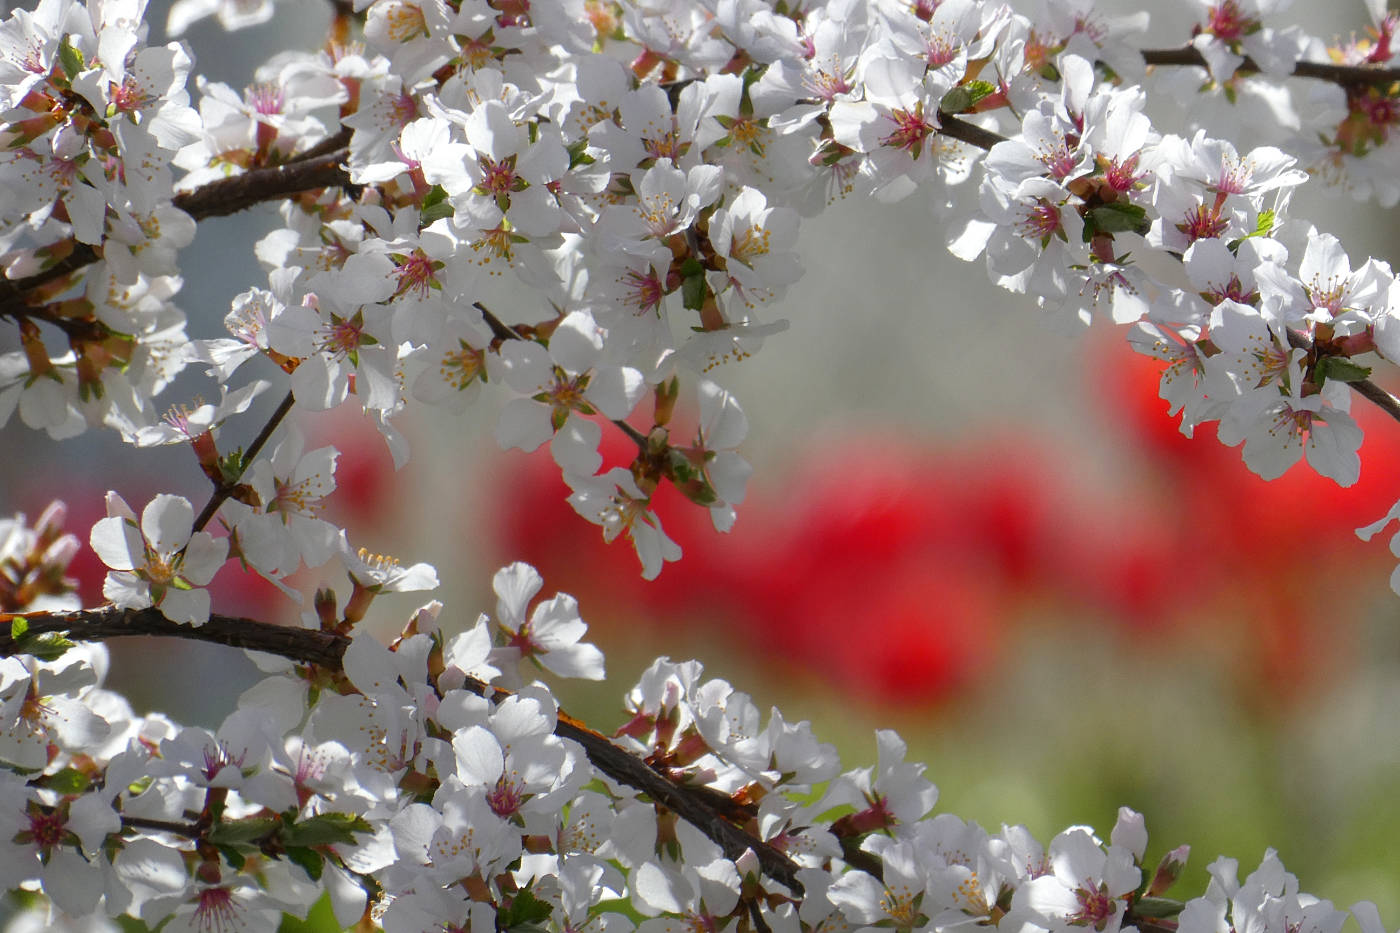 White blossoms with pink pistils on branches with blurry red tulips in background